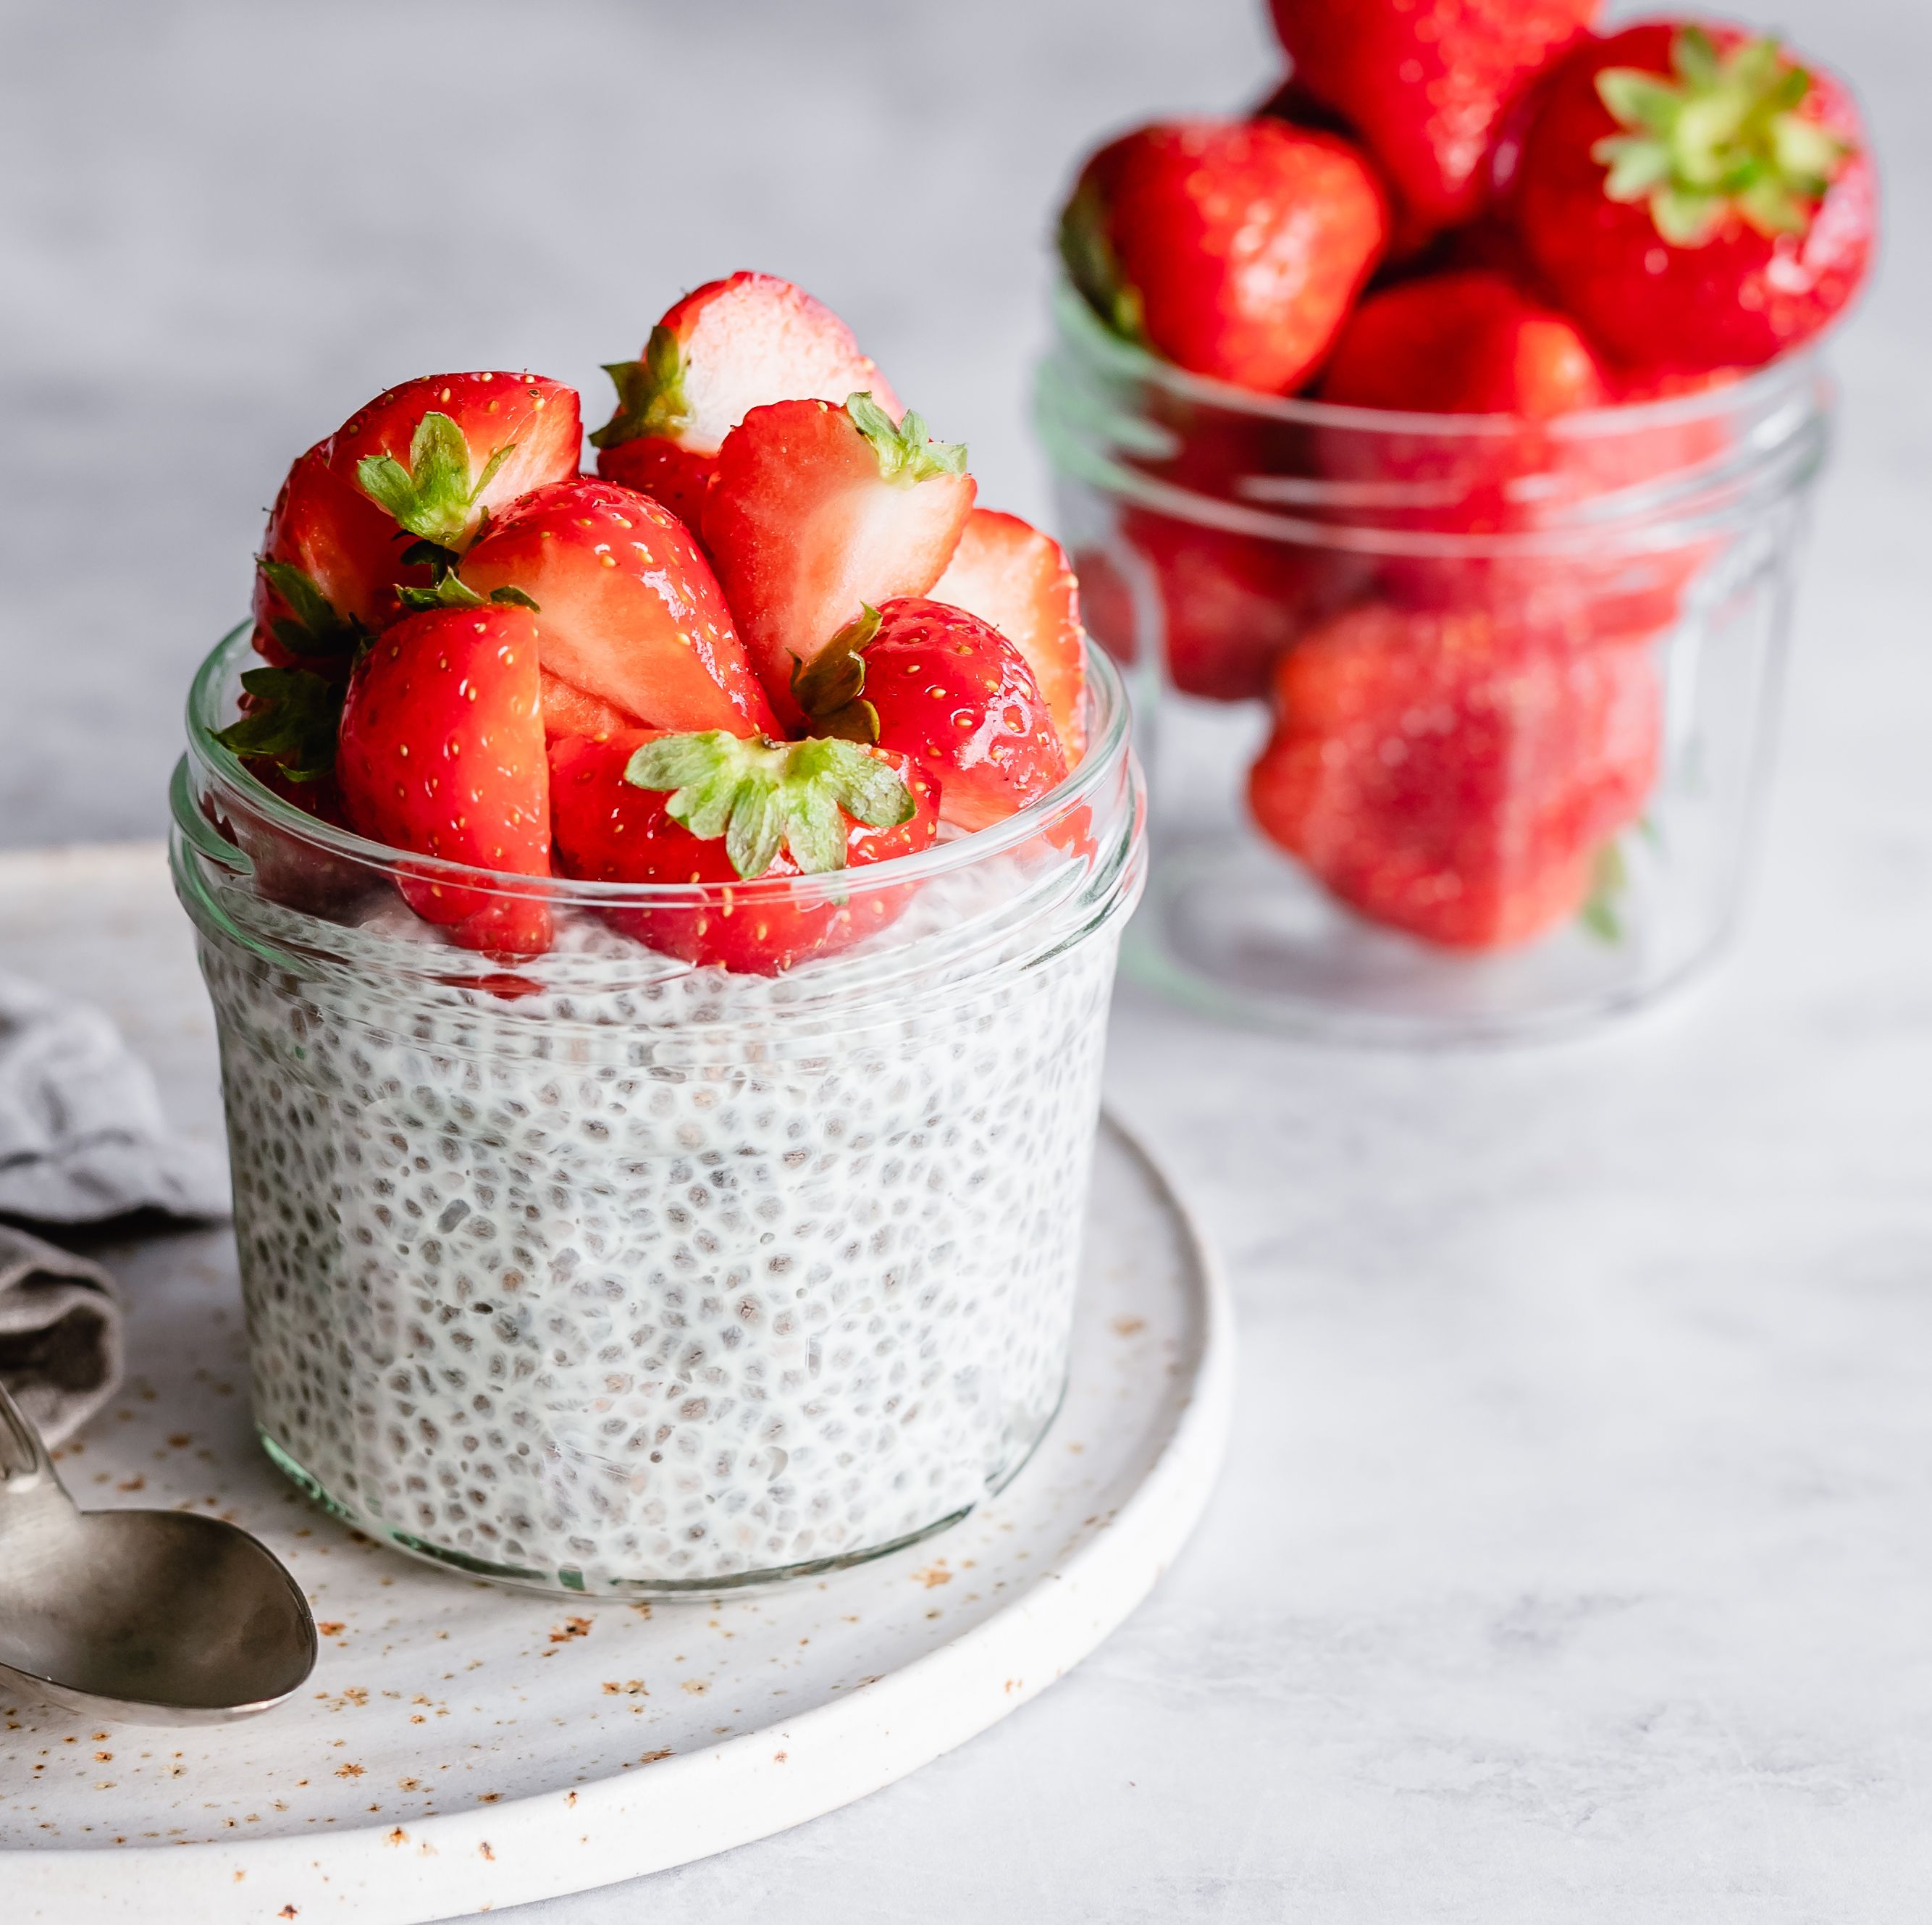 Do Chia Seeds Help You Lose Weight? Dietitians Set the Record Straight.